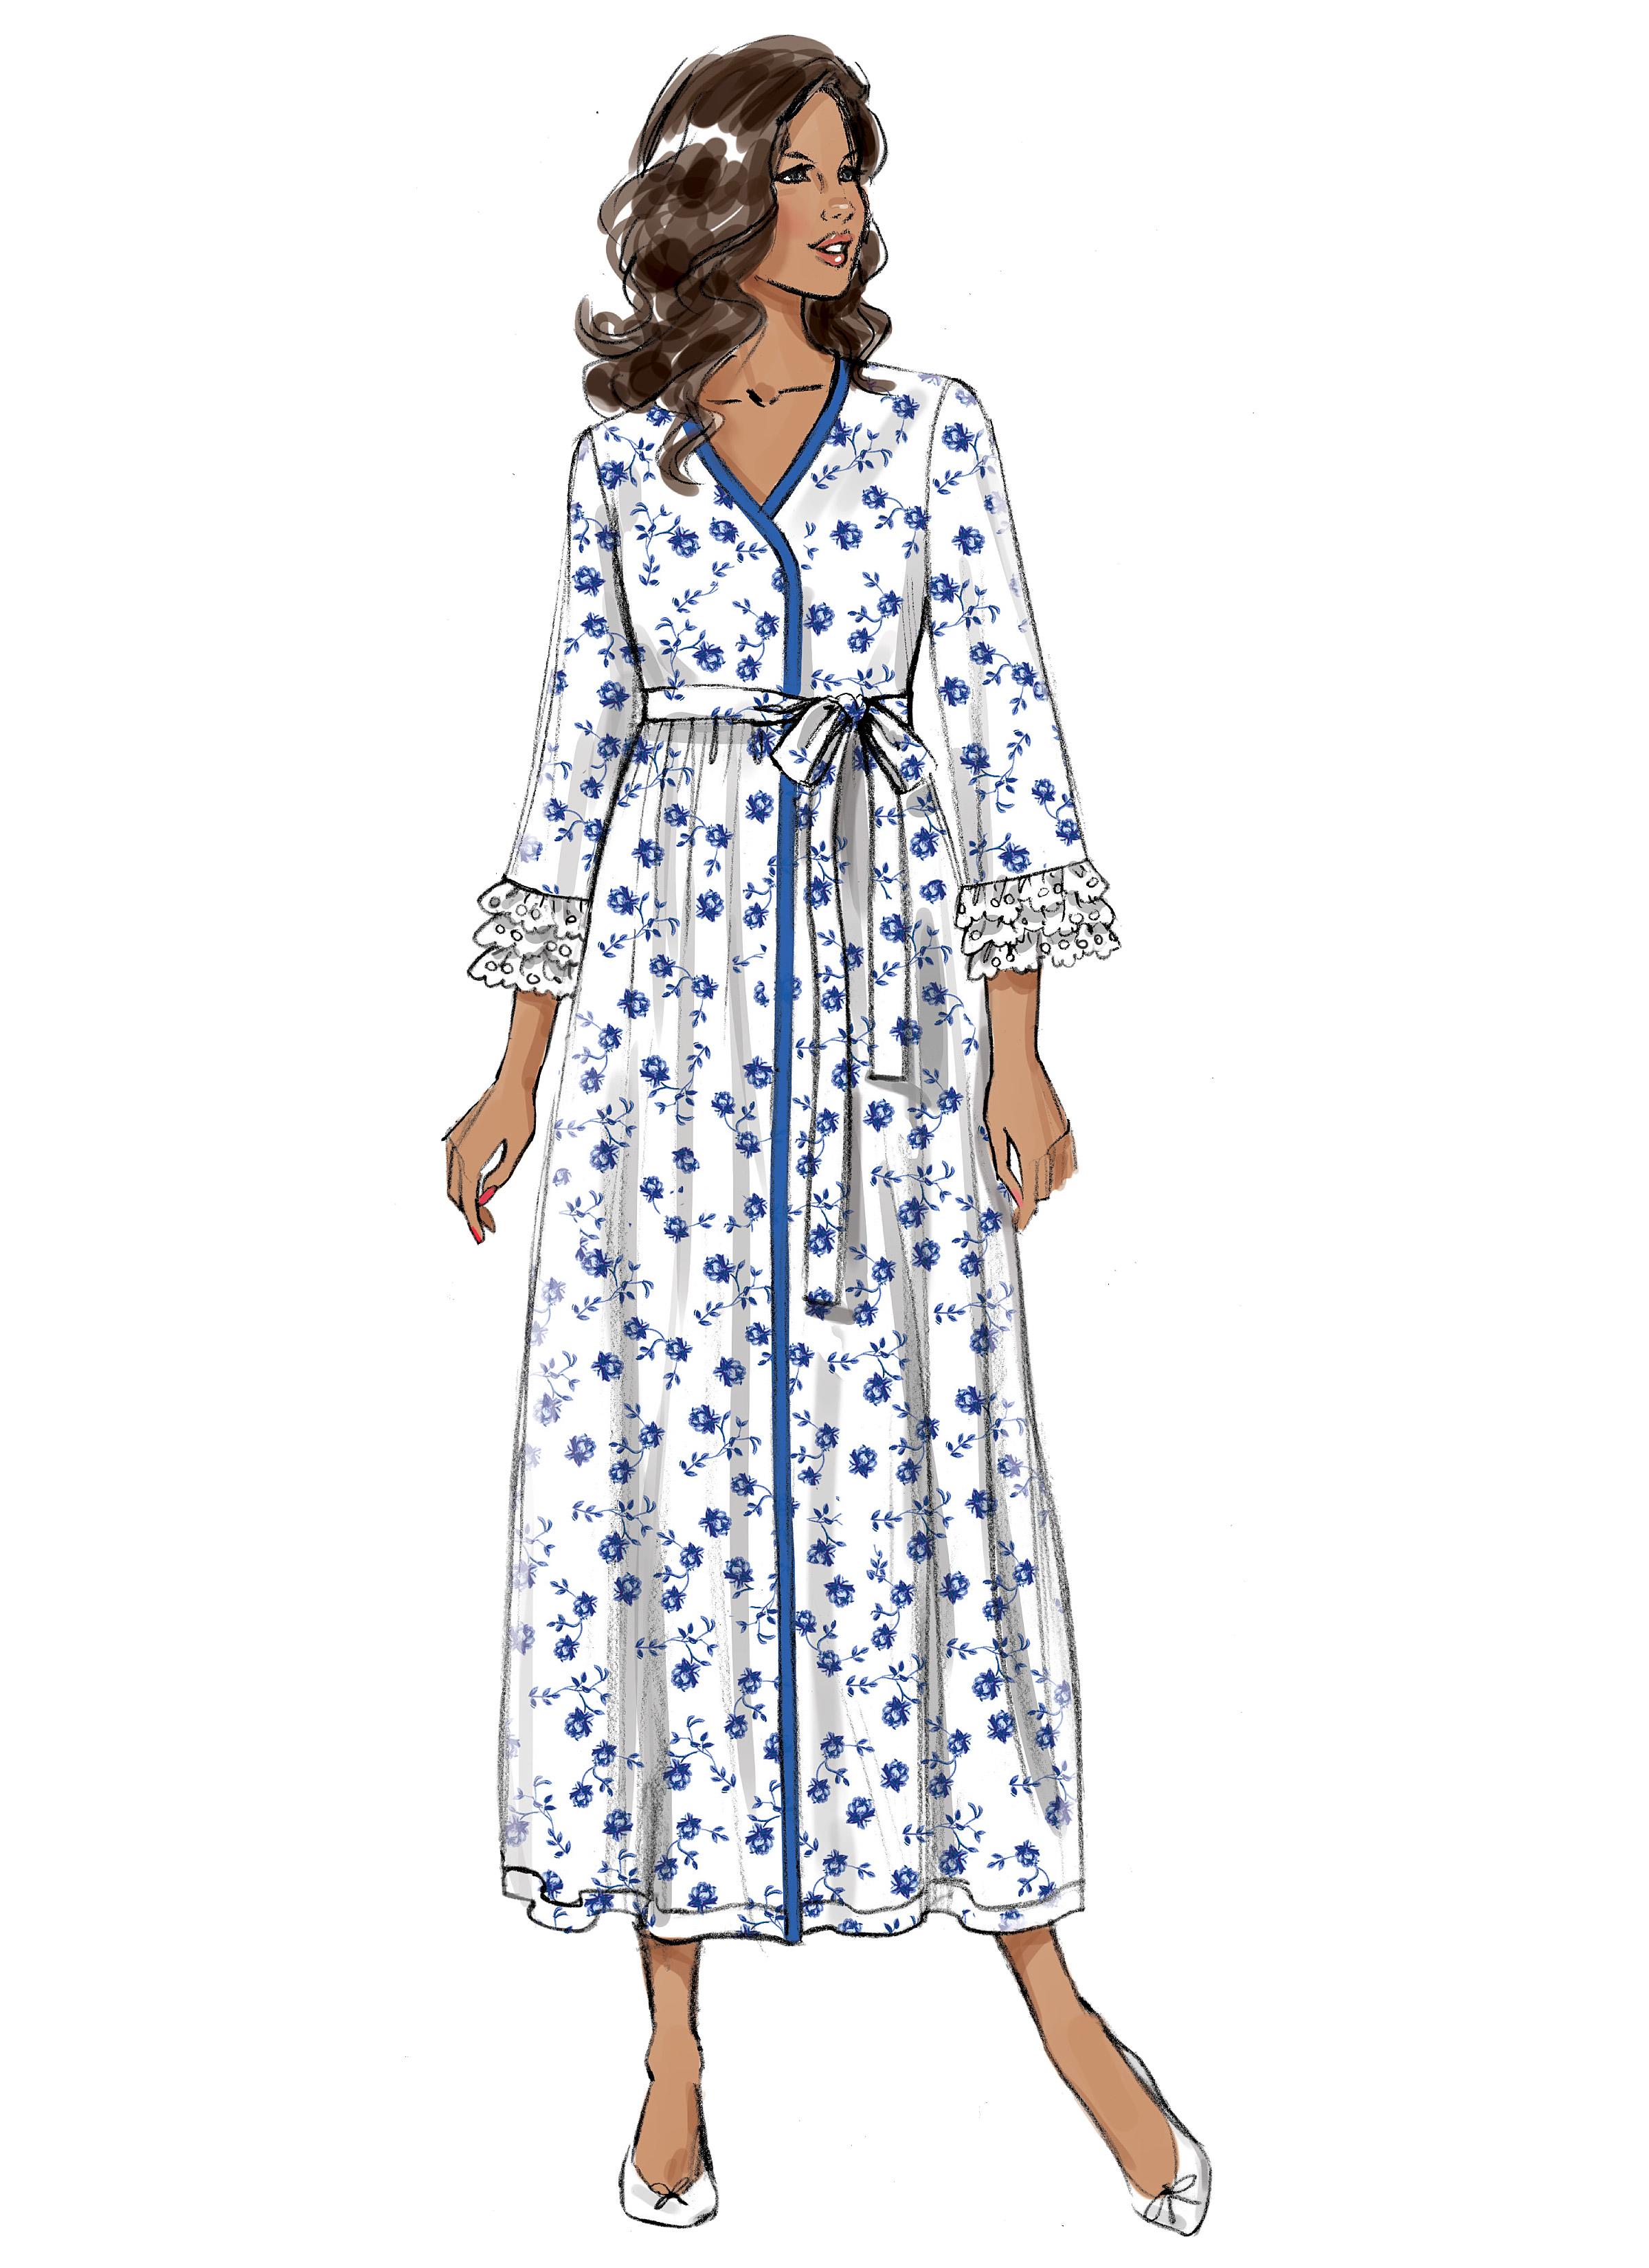 Butterick B6300 Misses'/Women's Robe, Belt and Negligee